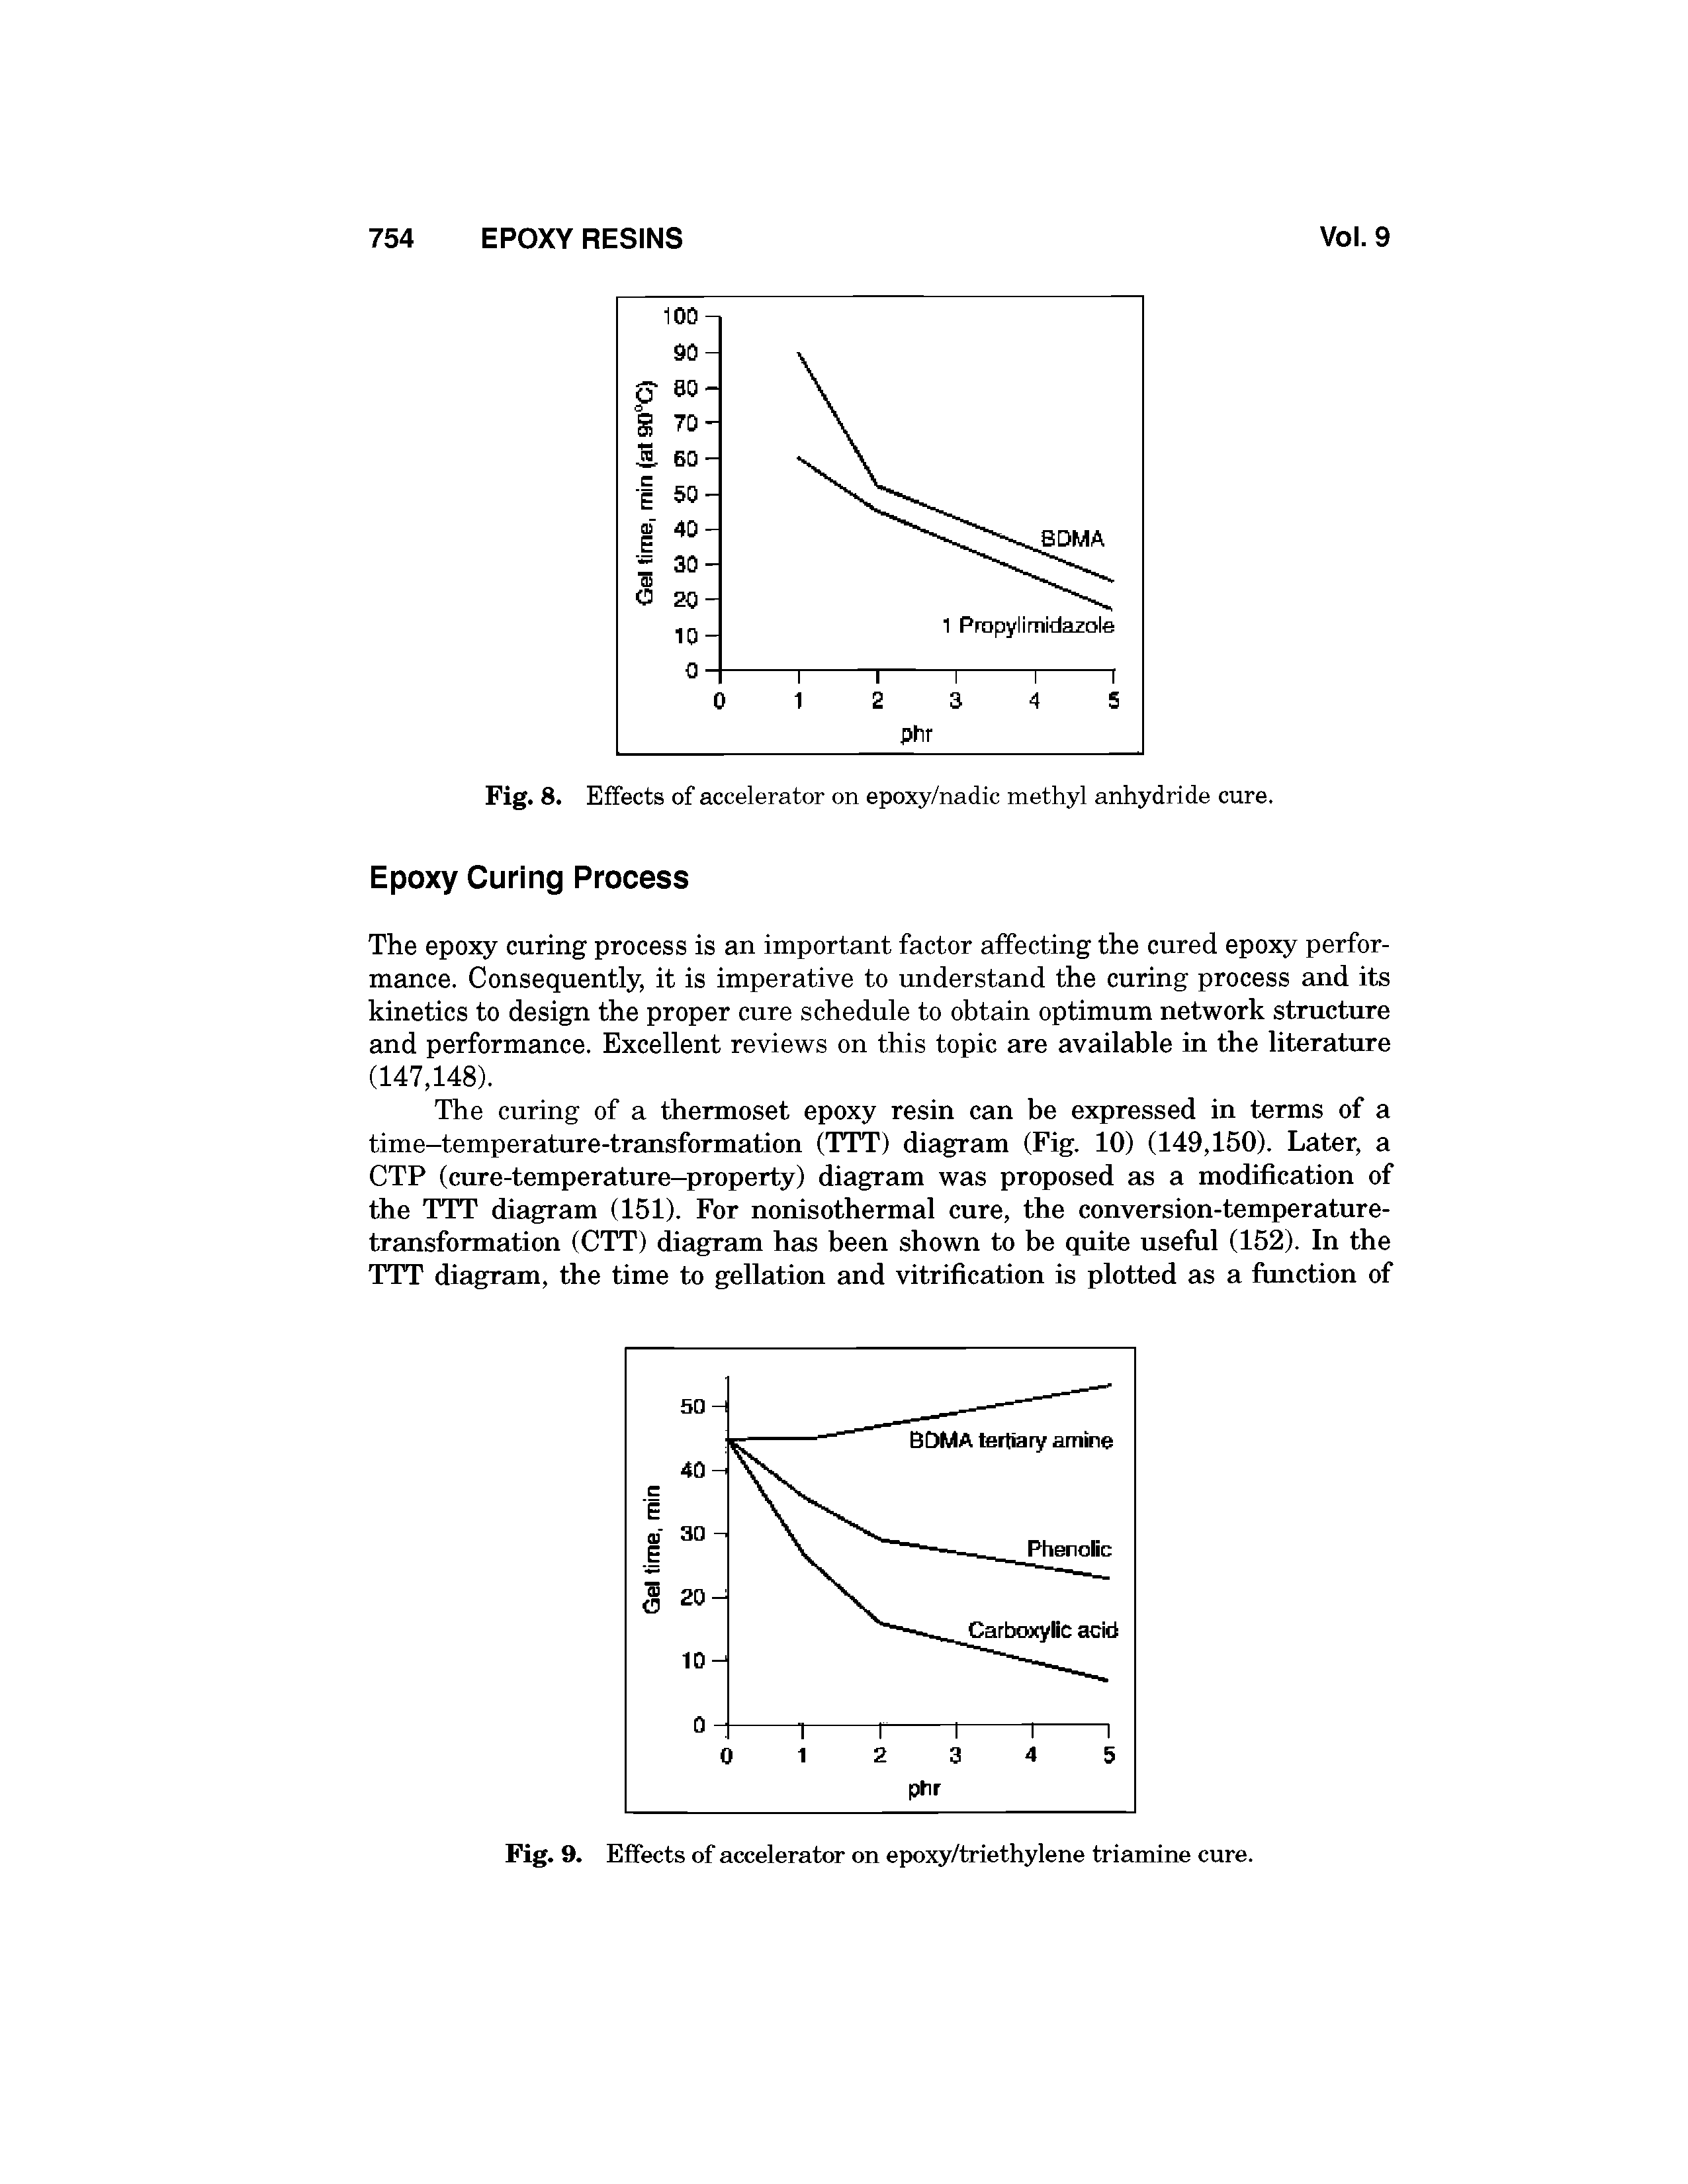 Fig. 8. Effects of accelerator on epoxy/nadic methyl anhydride cure.